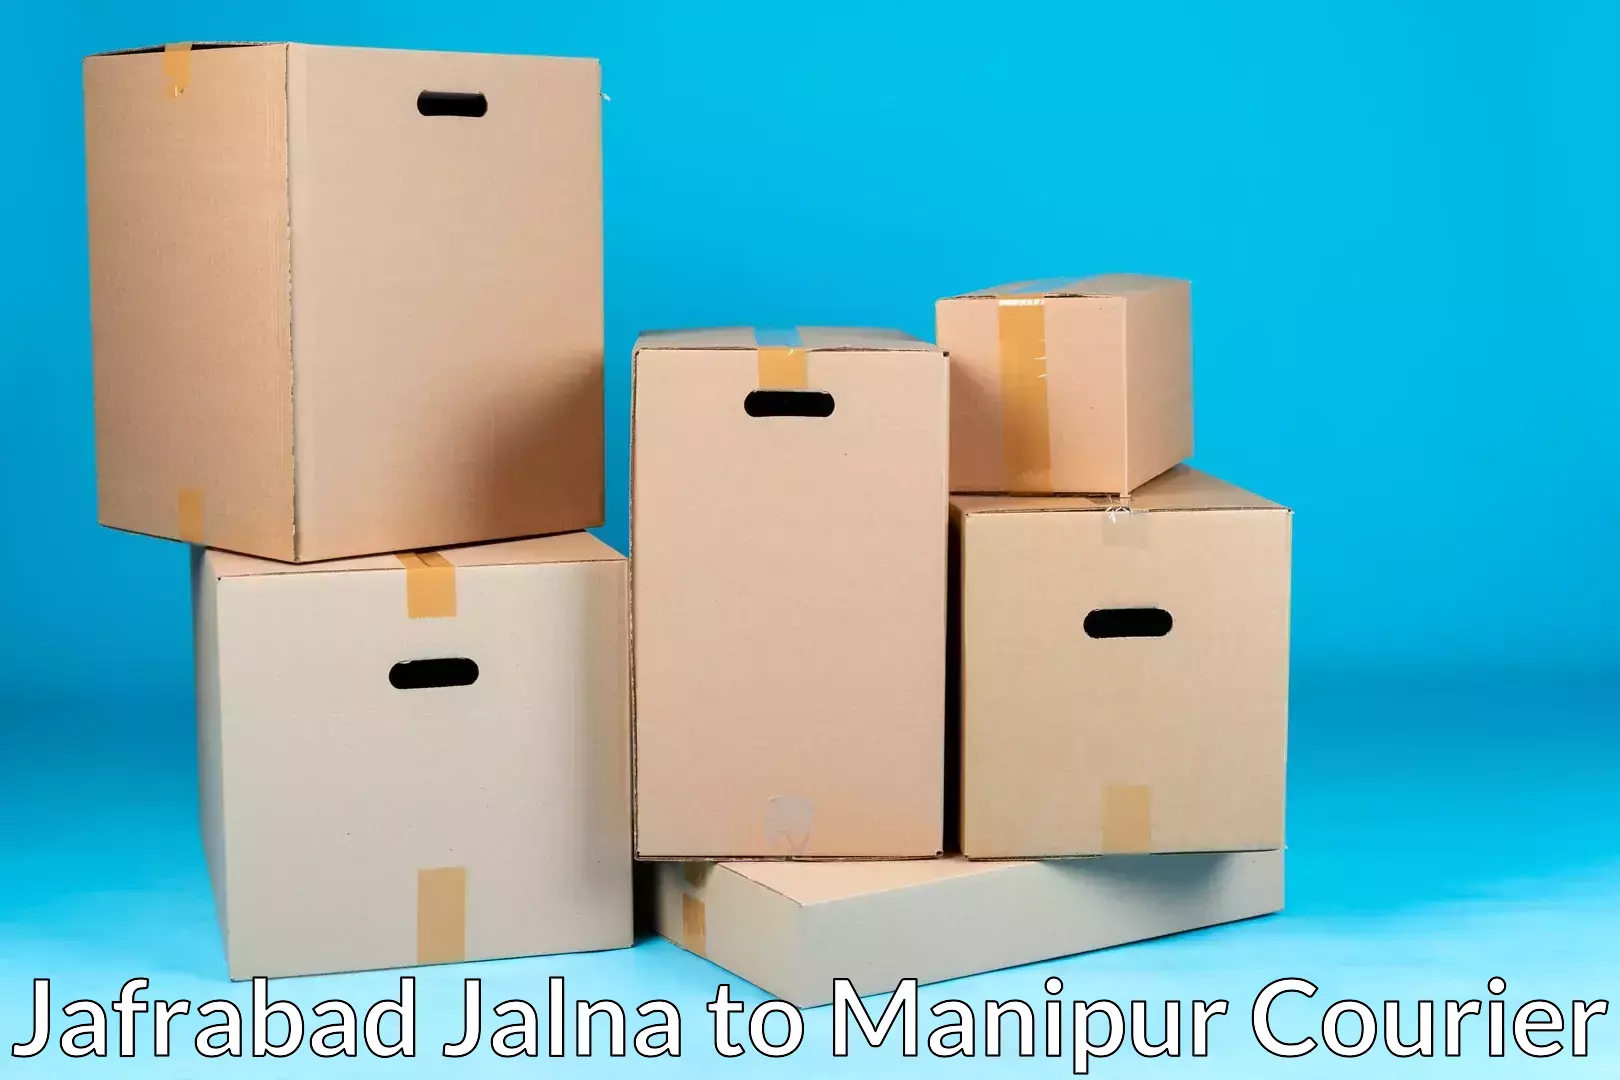 Full-service relocation in Jafrabad Jalna to Manipur